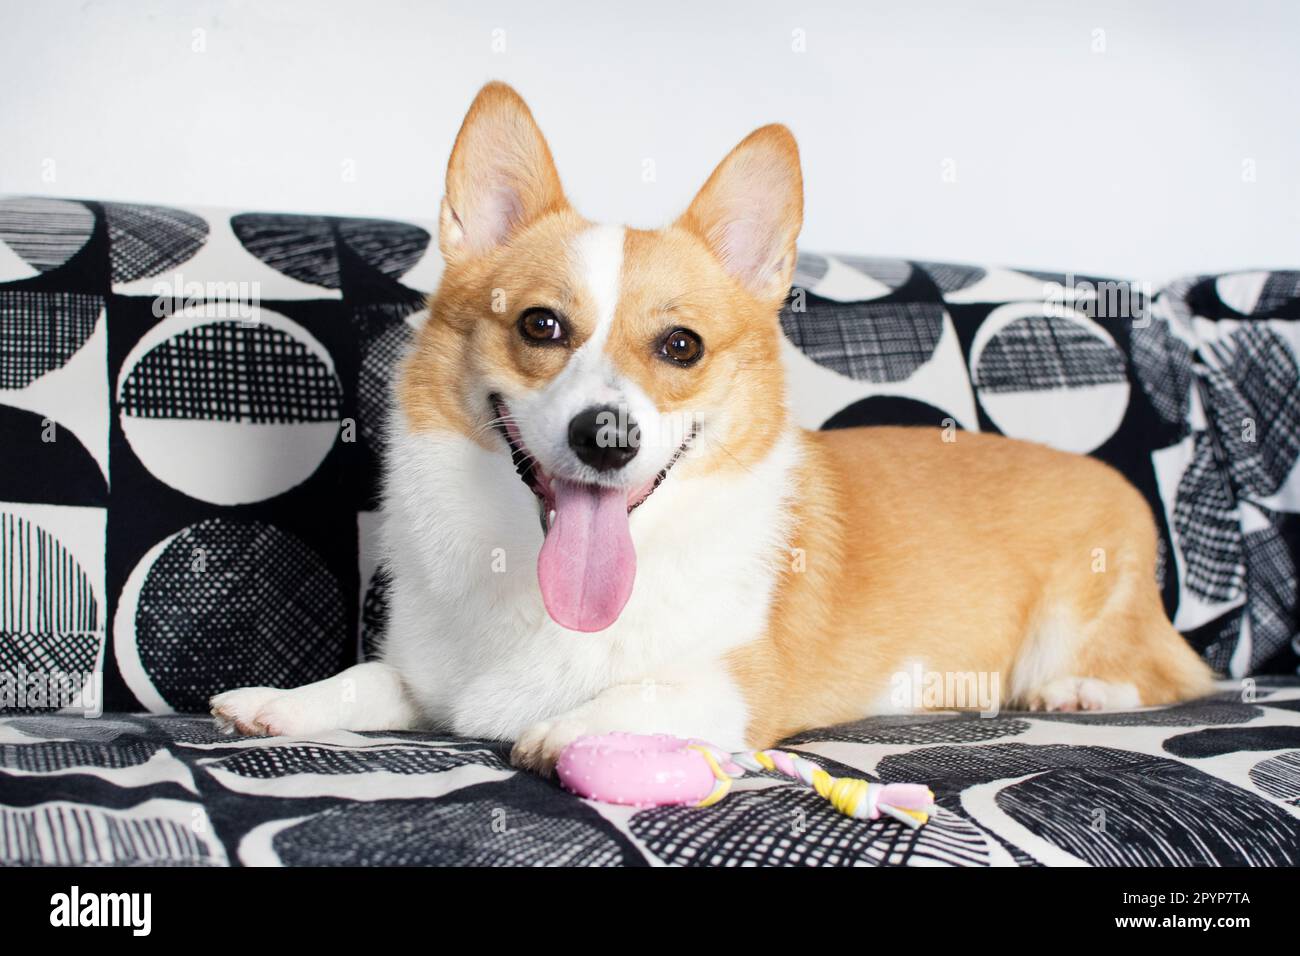 Cute Welsh Pembroke Corgi dog playing with a pink toy on the couch. Portrait of the dog. Dog on the couch Stock Photo